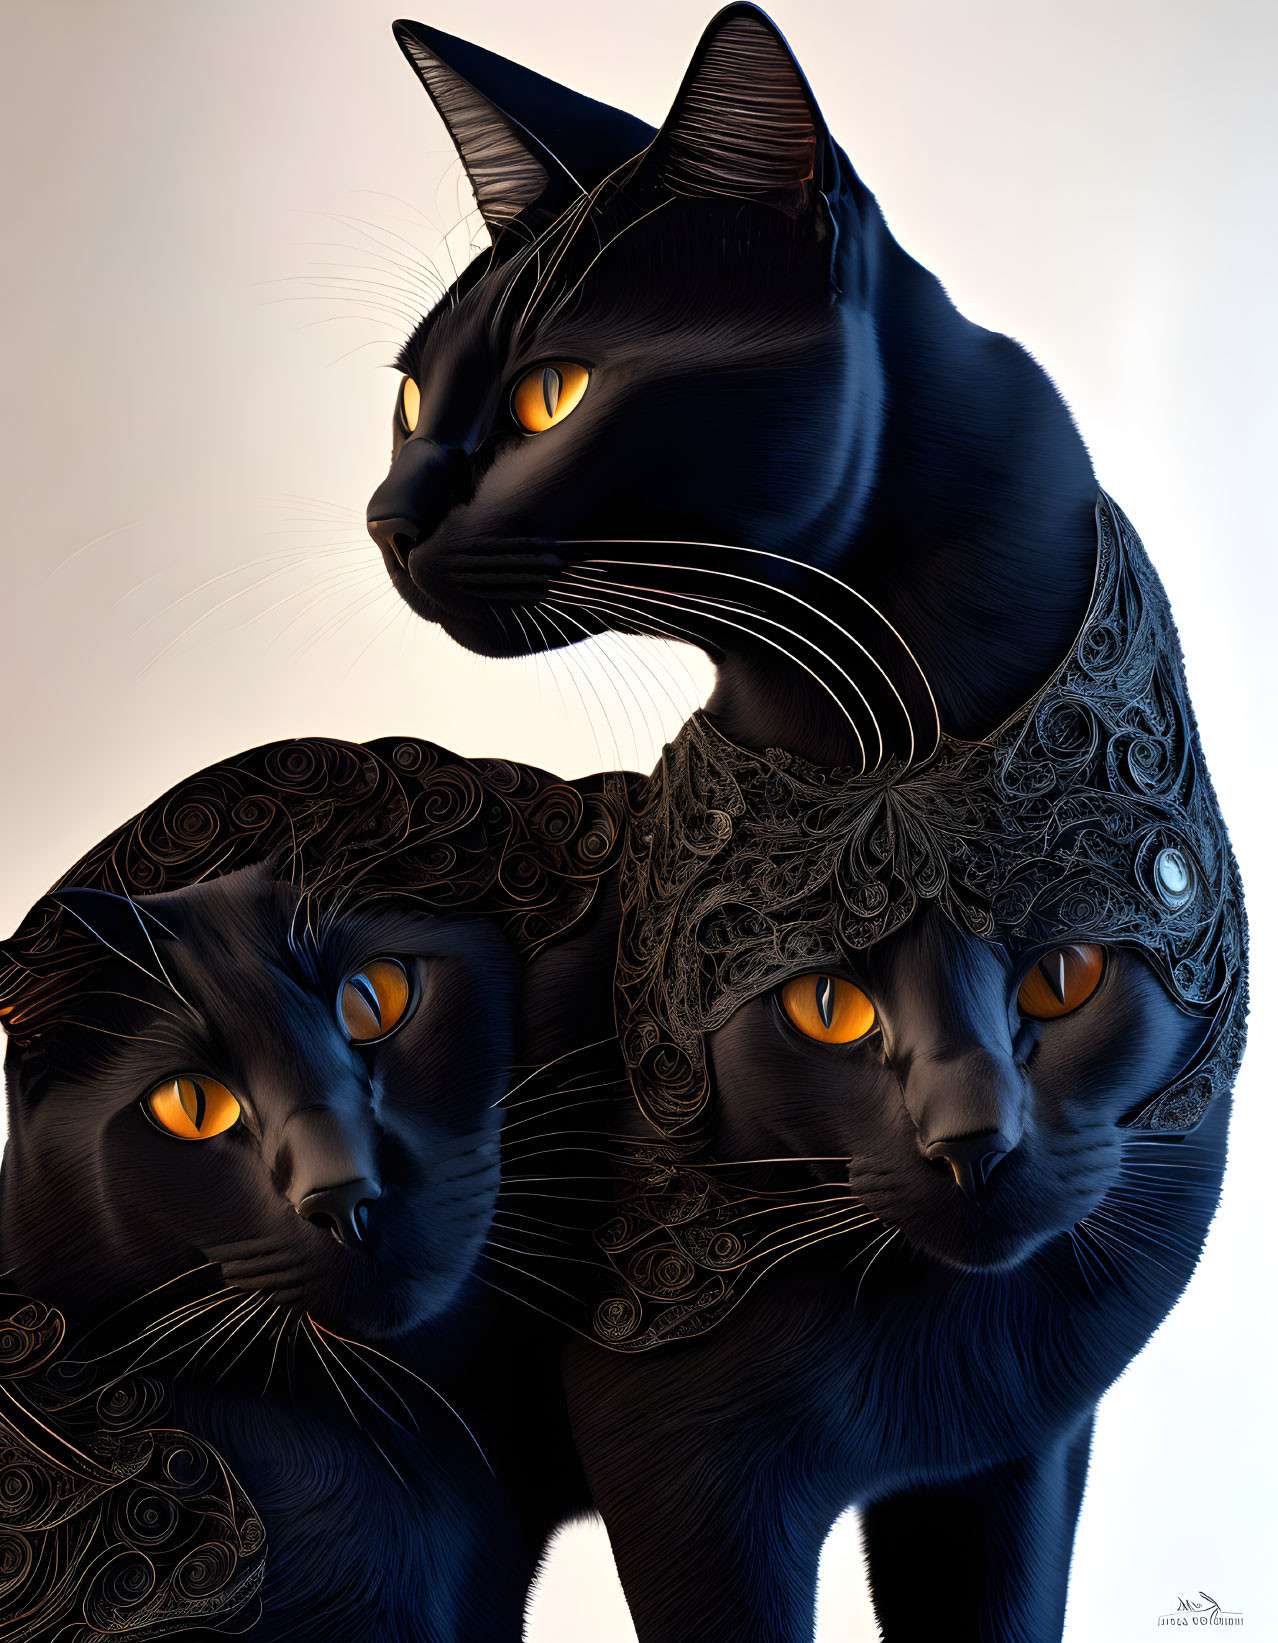 Paper Cut, quilling, photorealistic black cats, wh